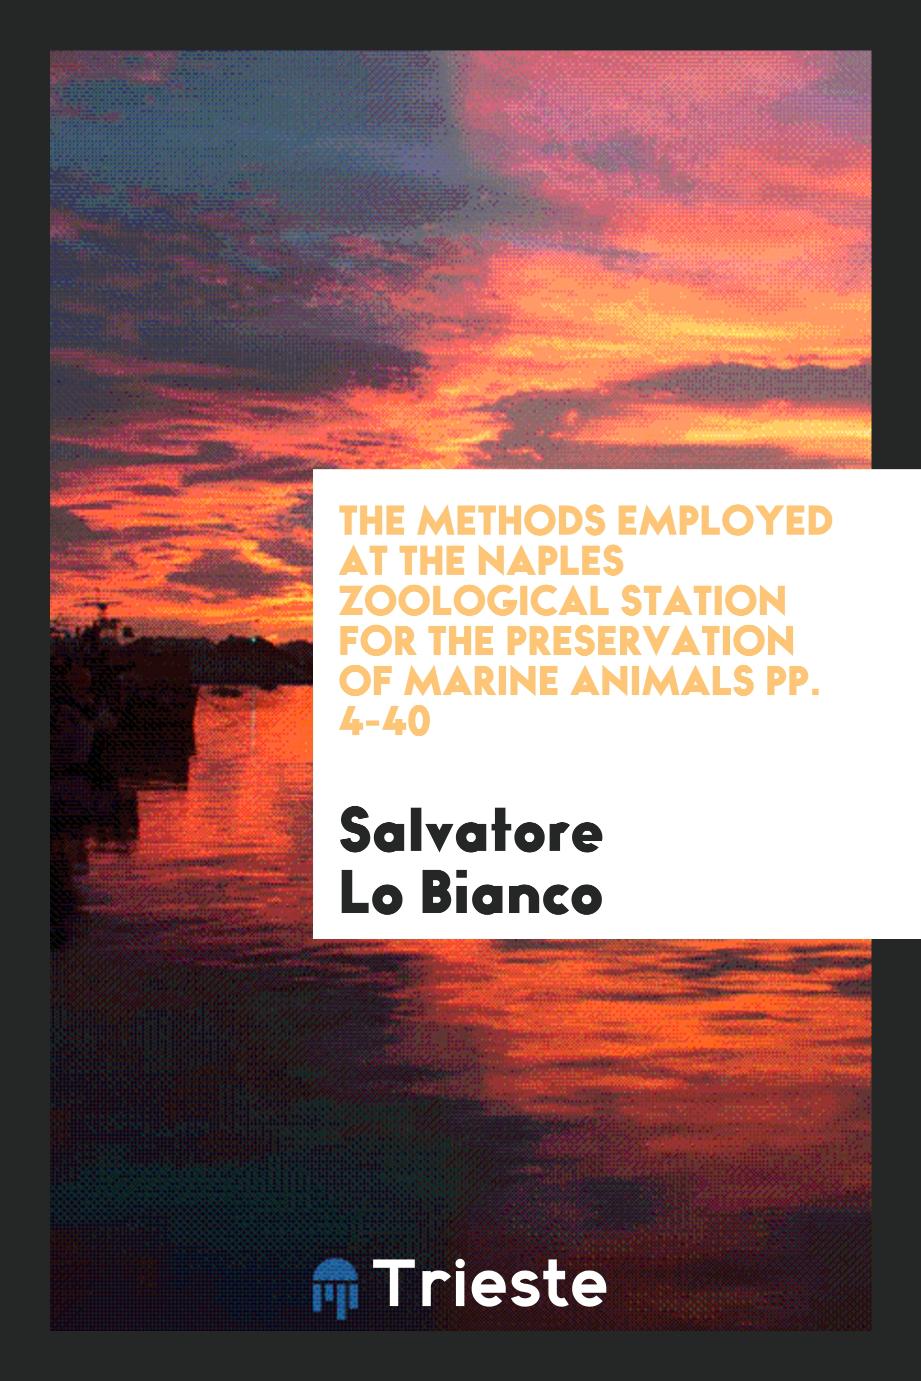 The Methods Employed at the Naples Zoological Station for the Preservation of Marine Animals pp. 4-40